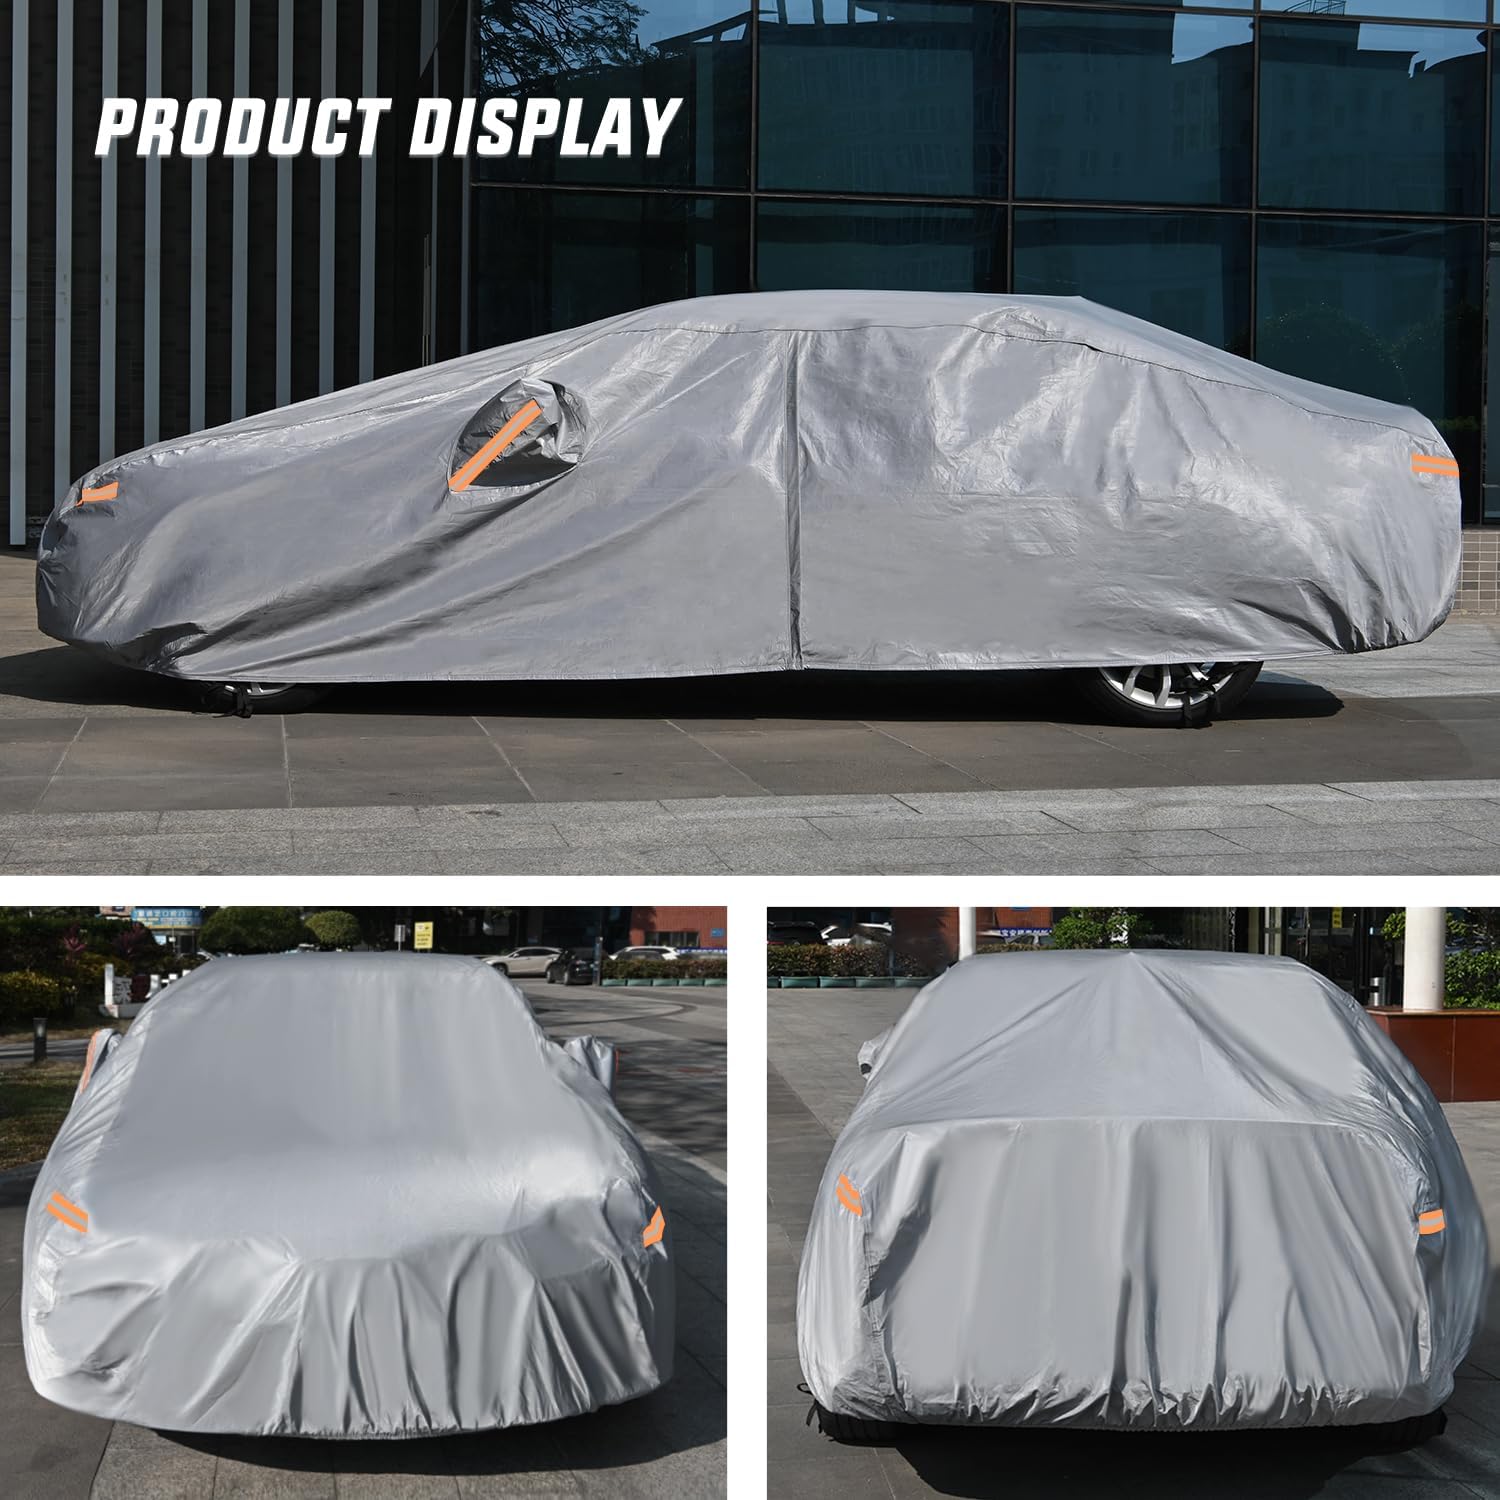 Universal Fit for Sedan-Length (178" to 185") Car Cover UV Protection Nilight